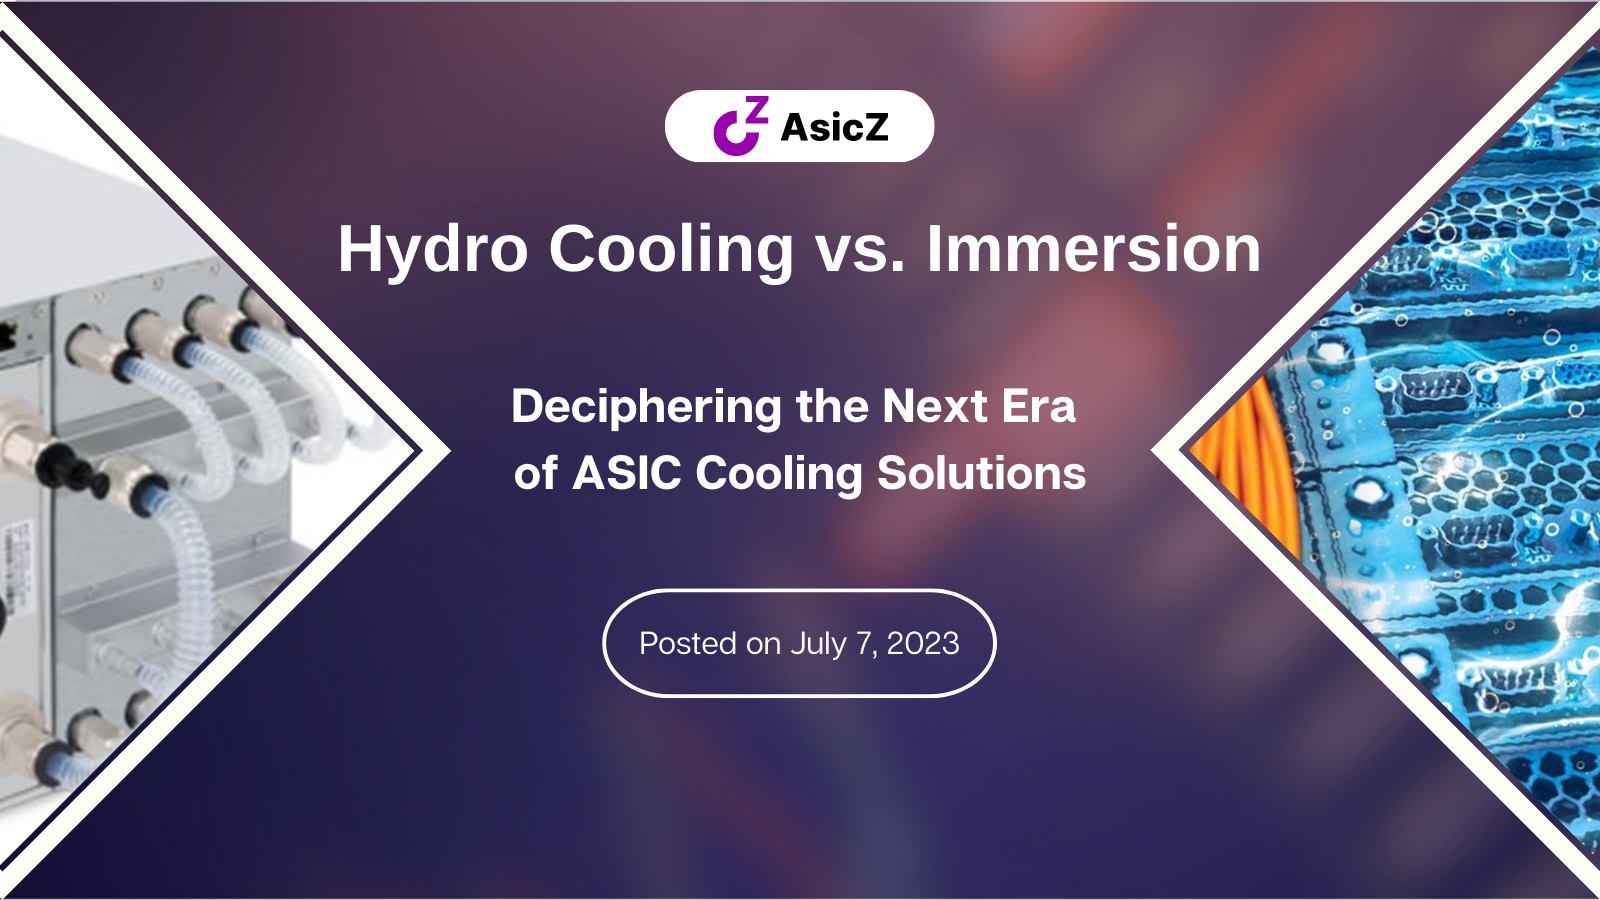 Hydro Cooling vs. Immersion – Deciphering the Next Era of ASIC Cooling Solutions